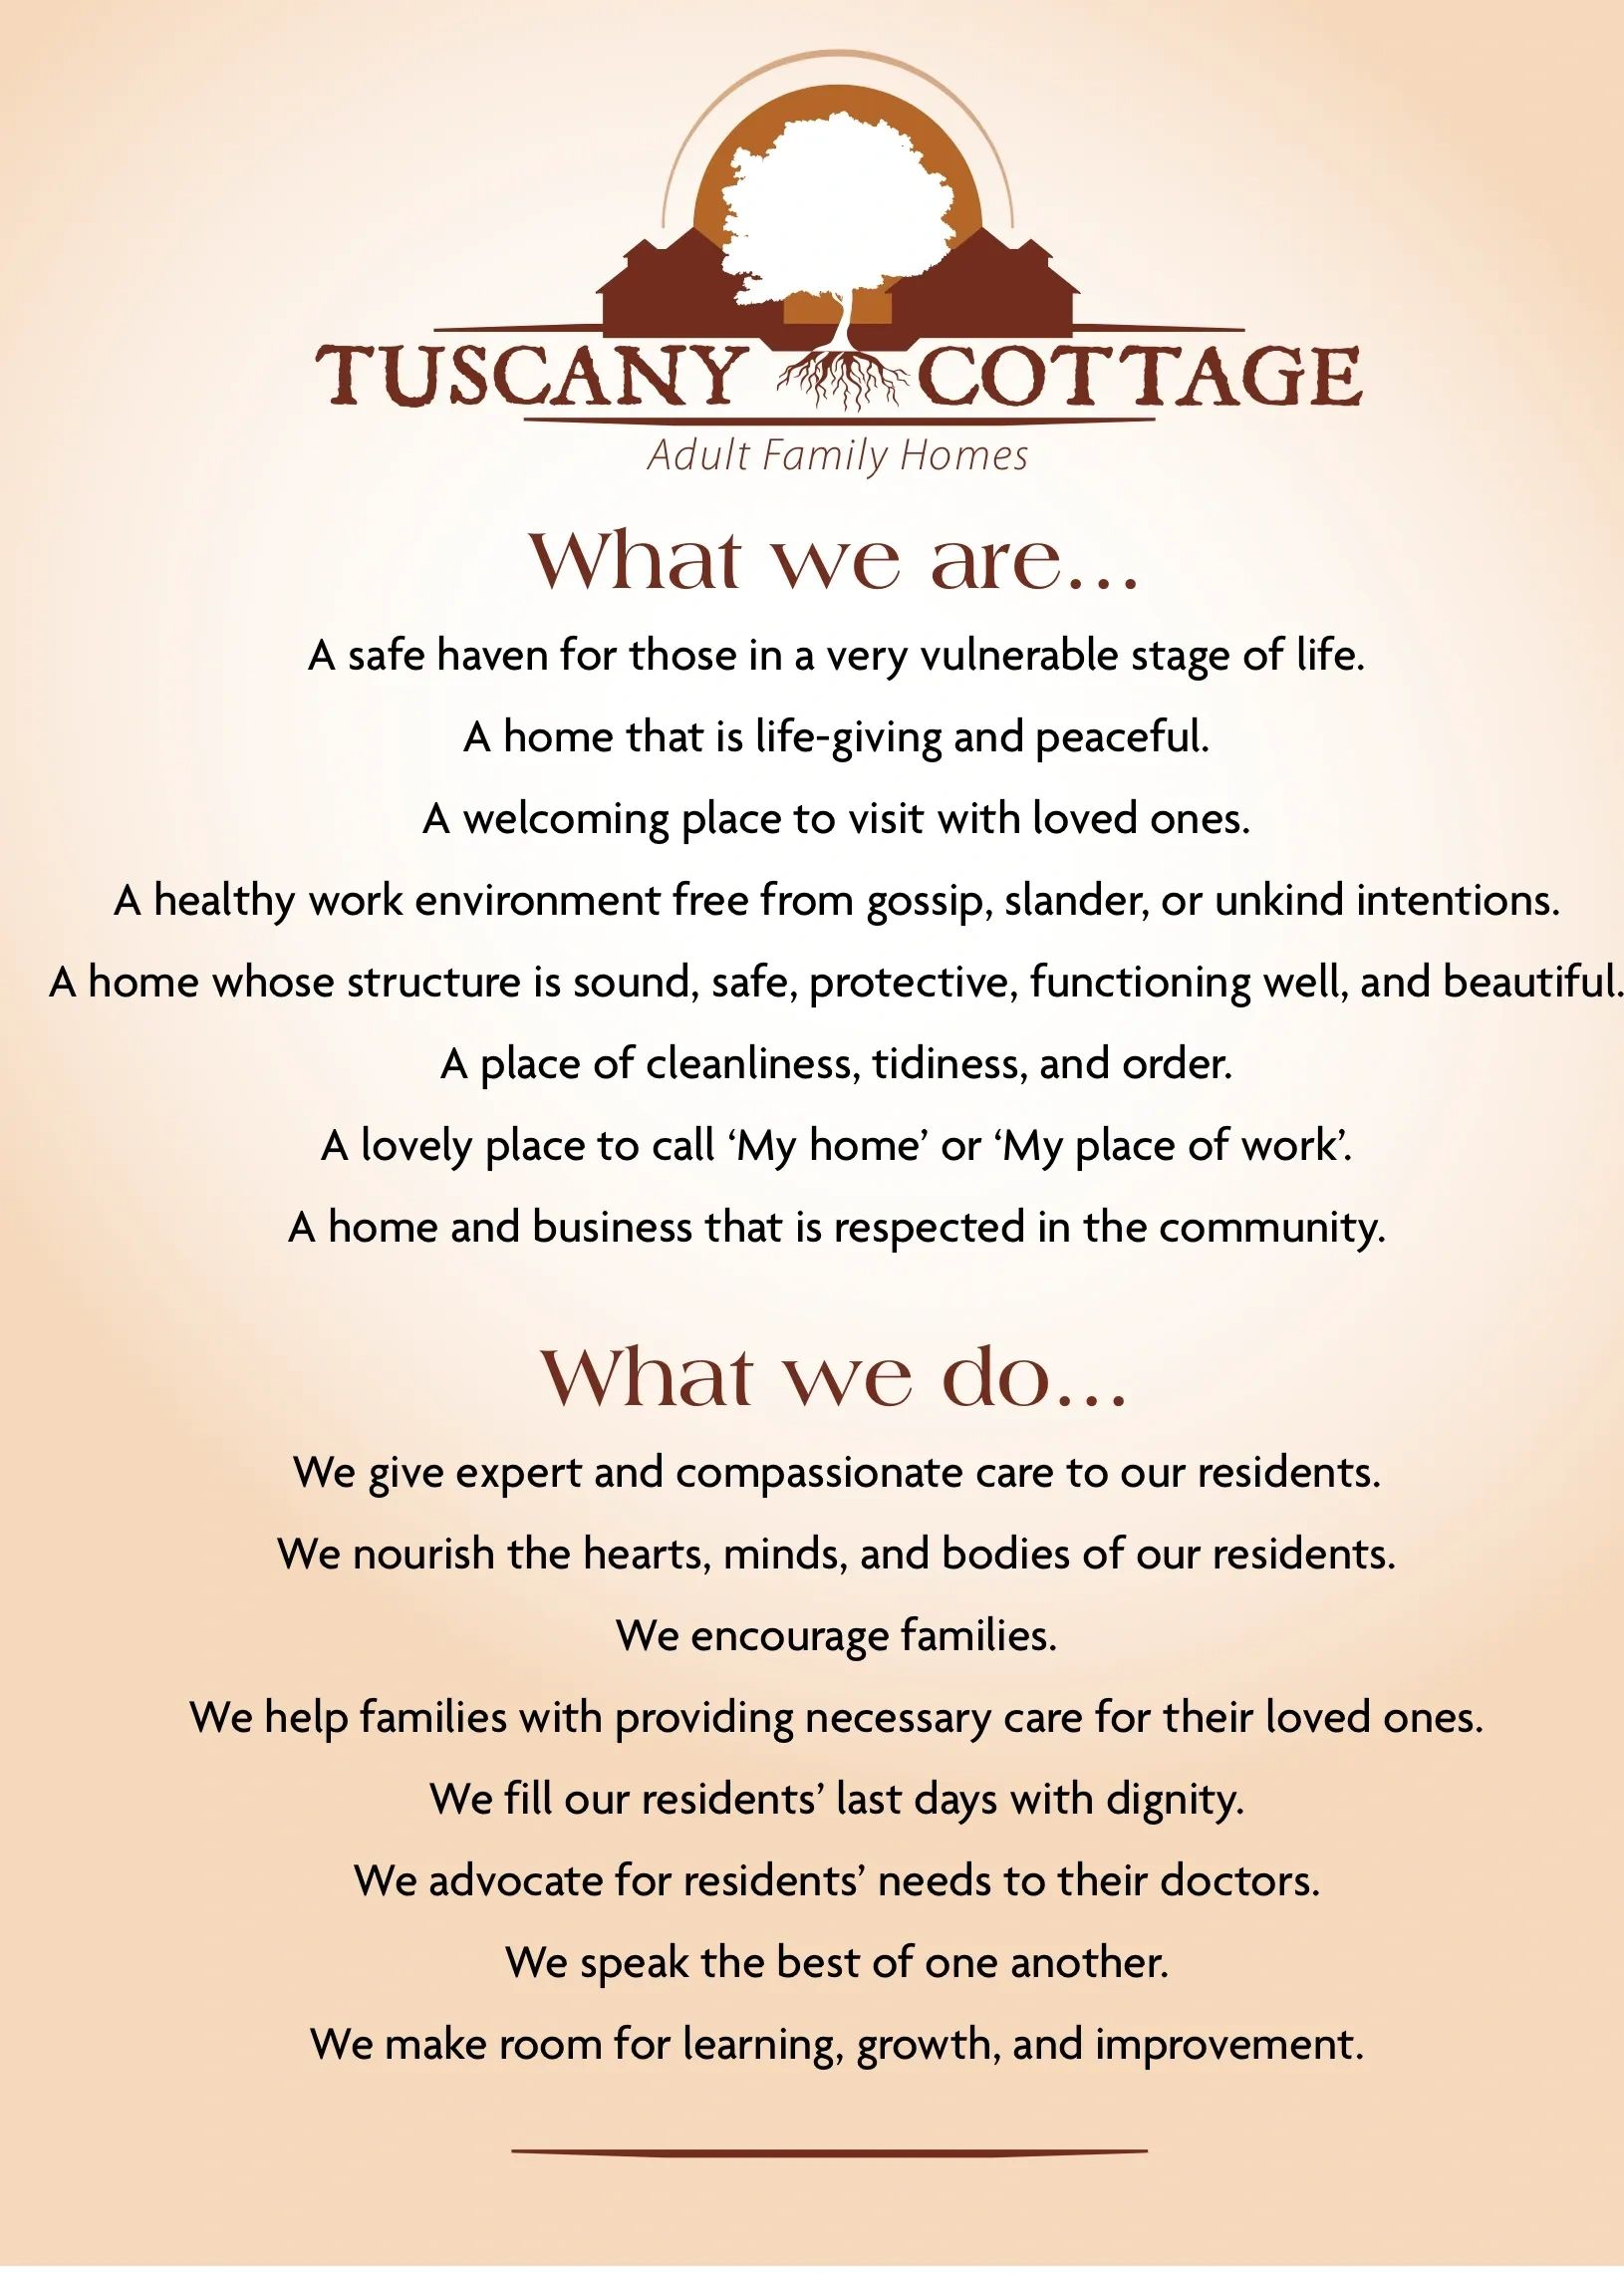 What we are about at Tuscany Cottage Adult Family Home